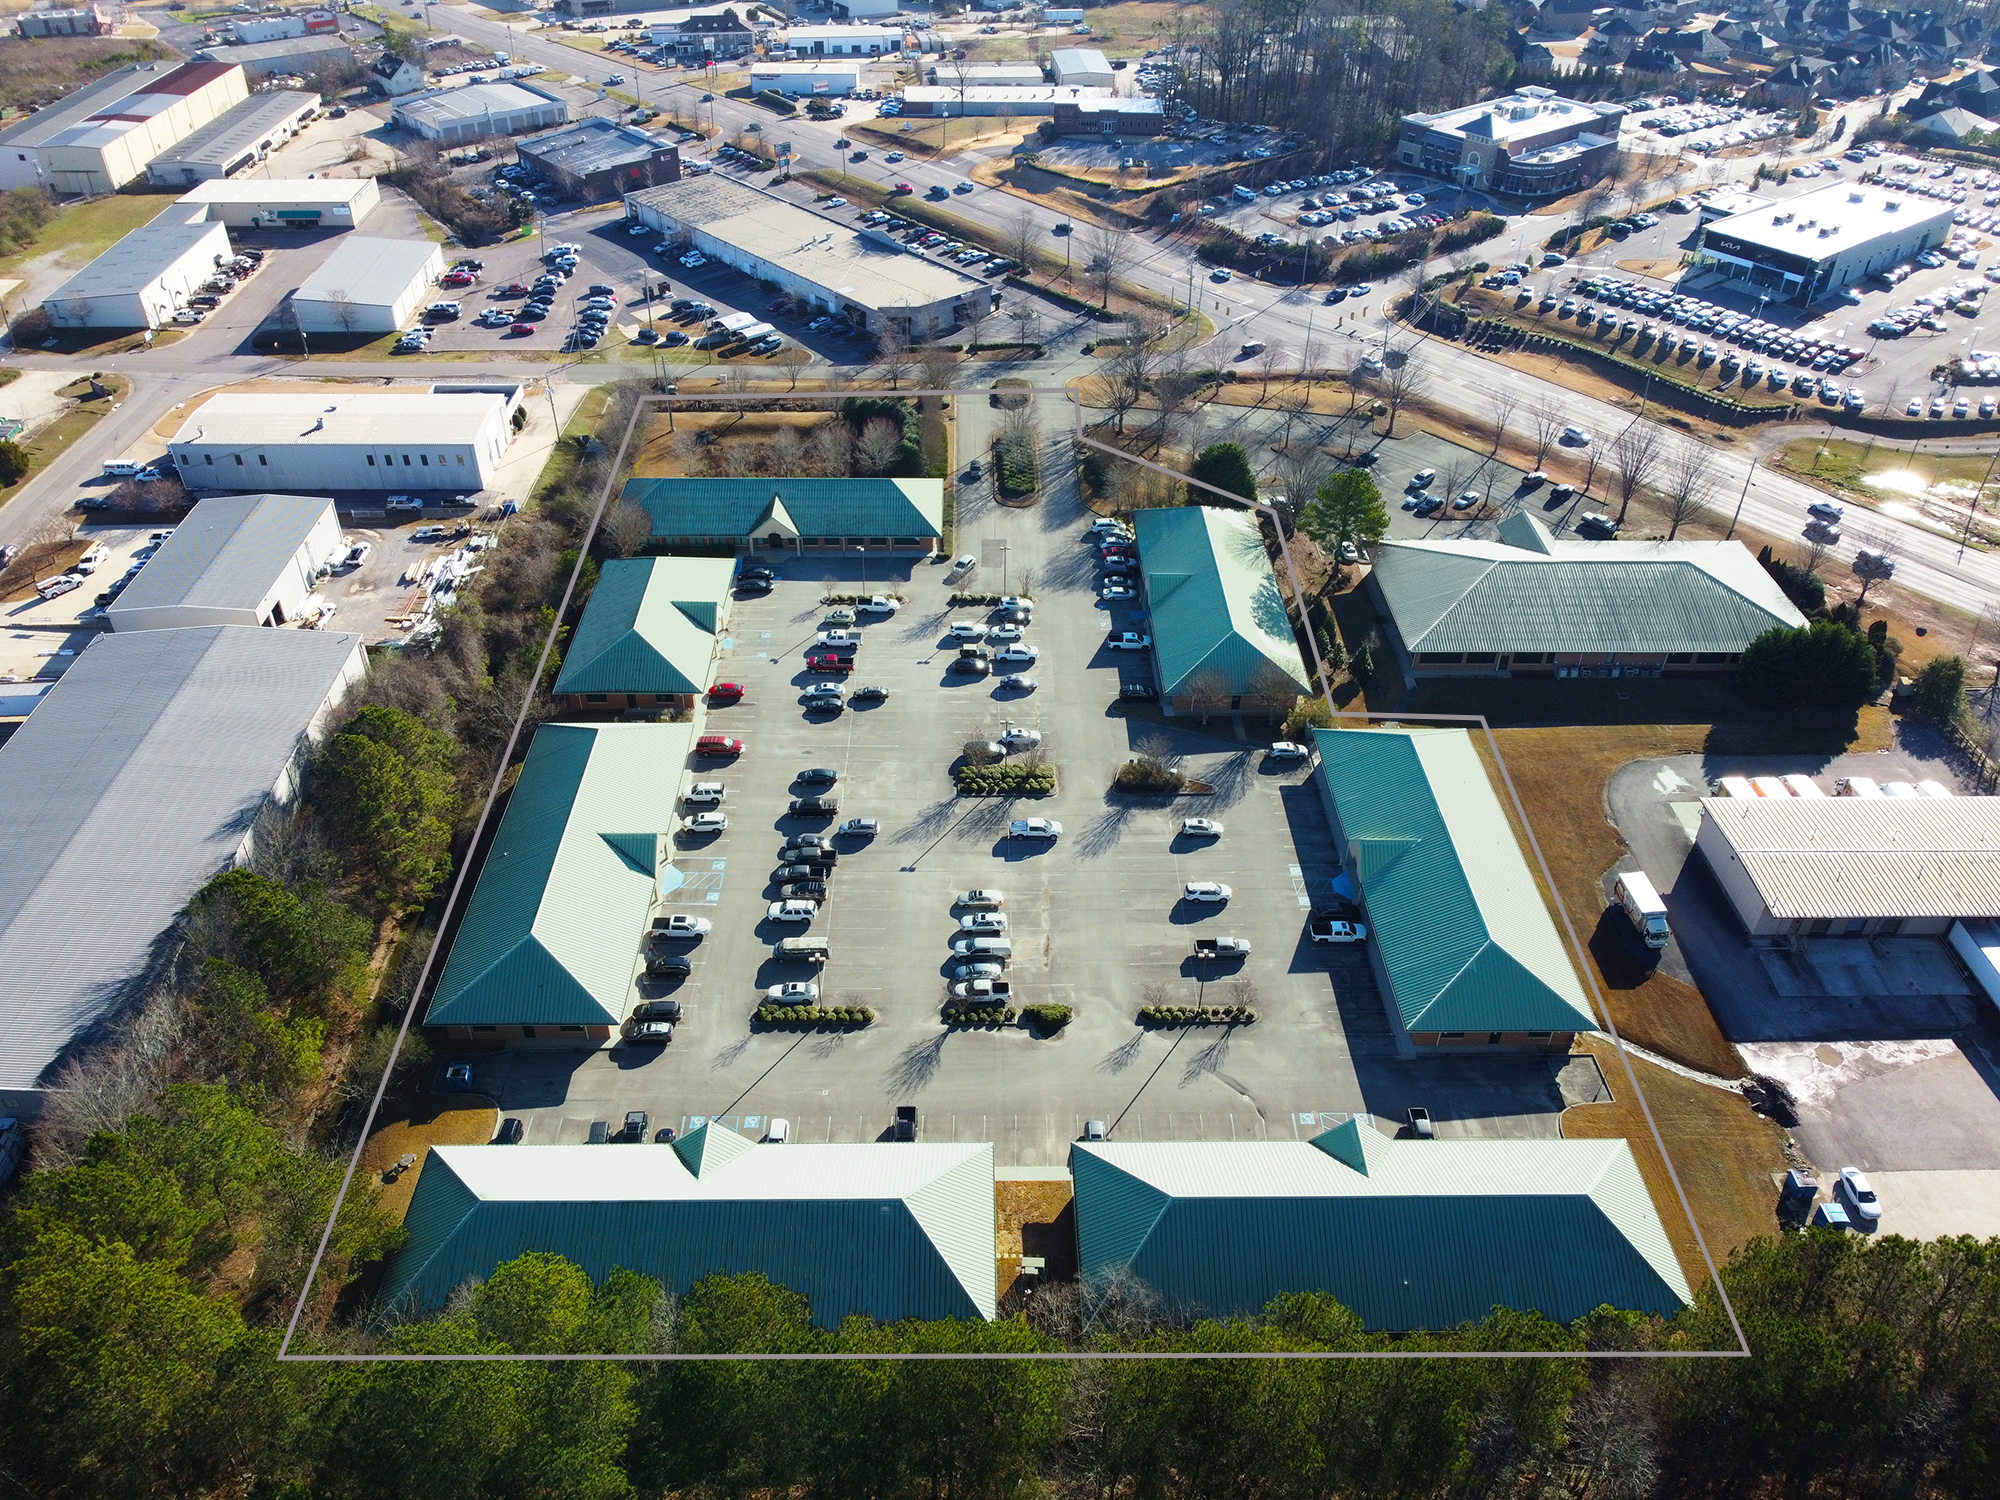 Realty company buys Trussville Office Park for $6.125 million